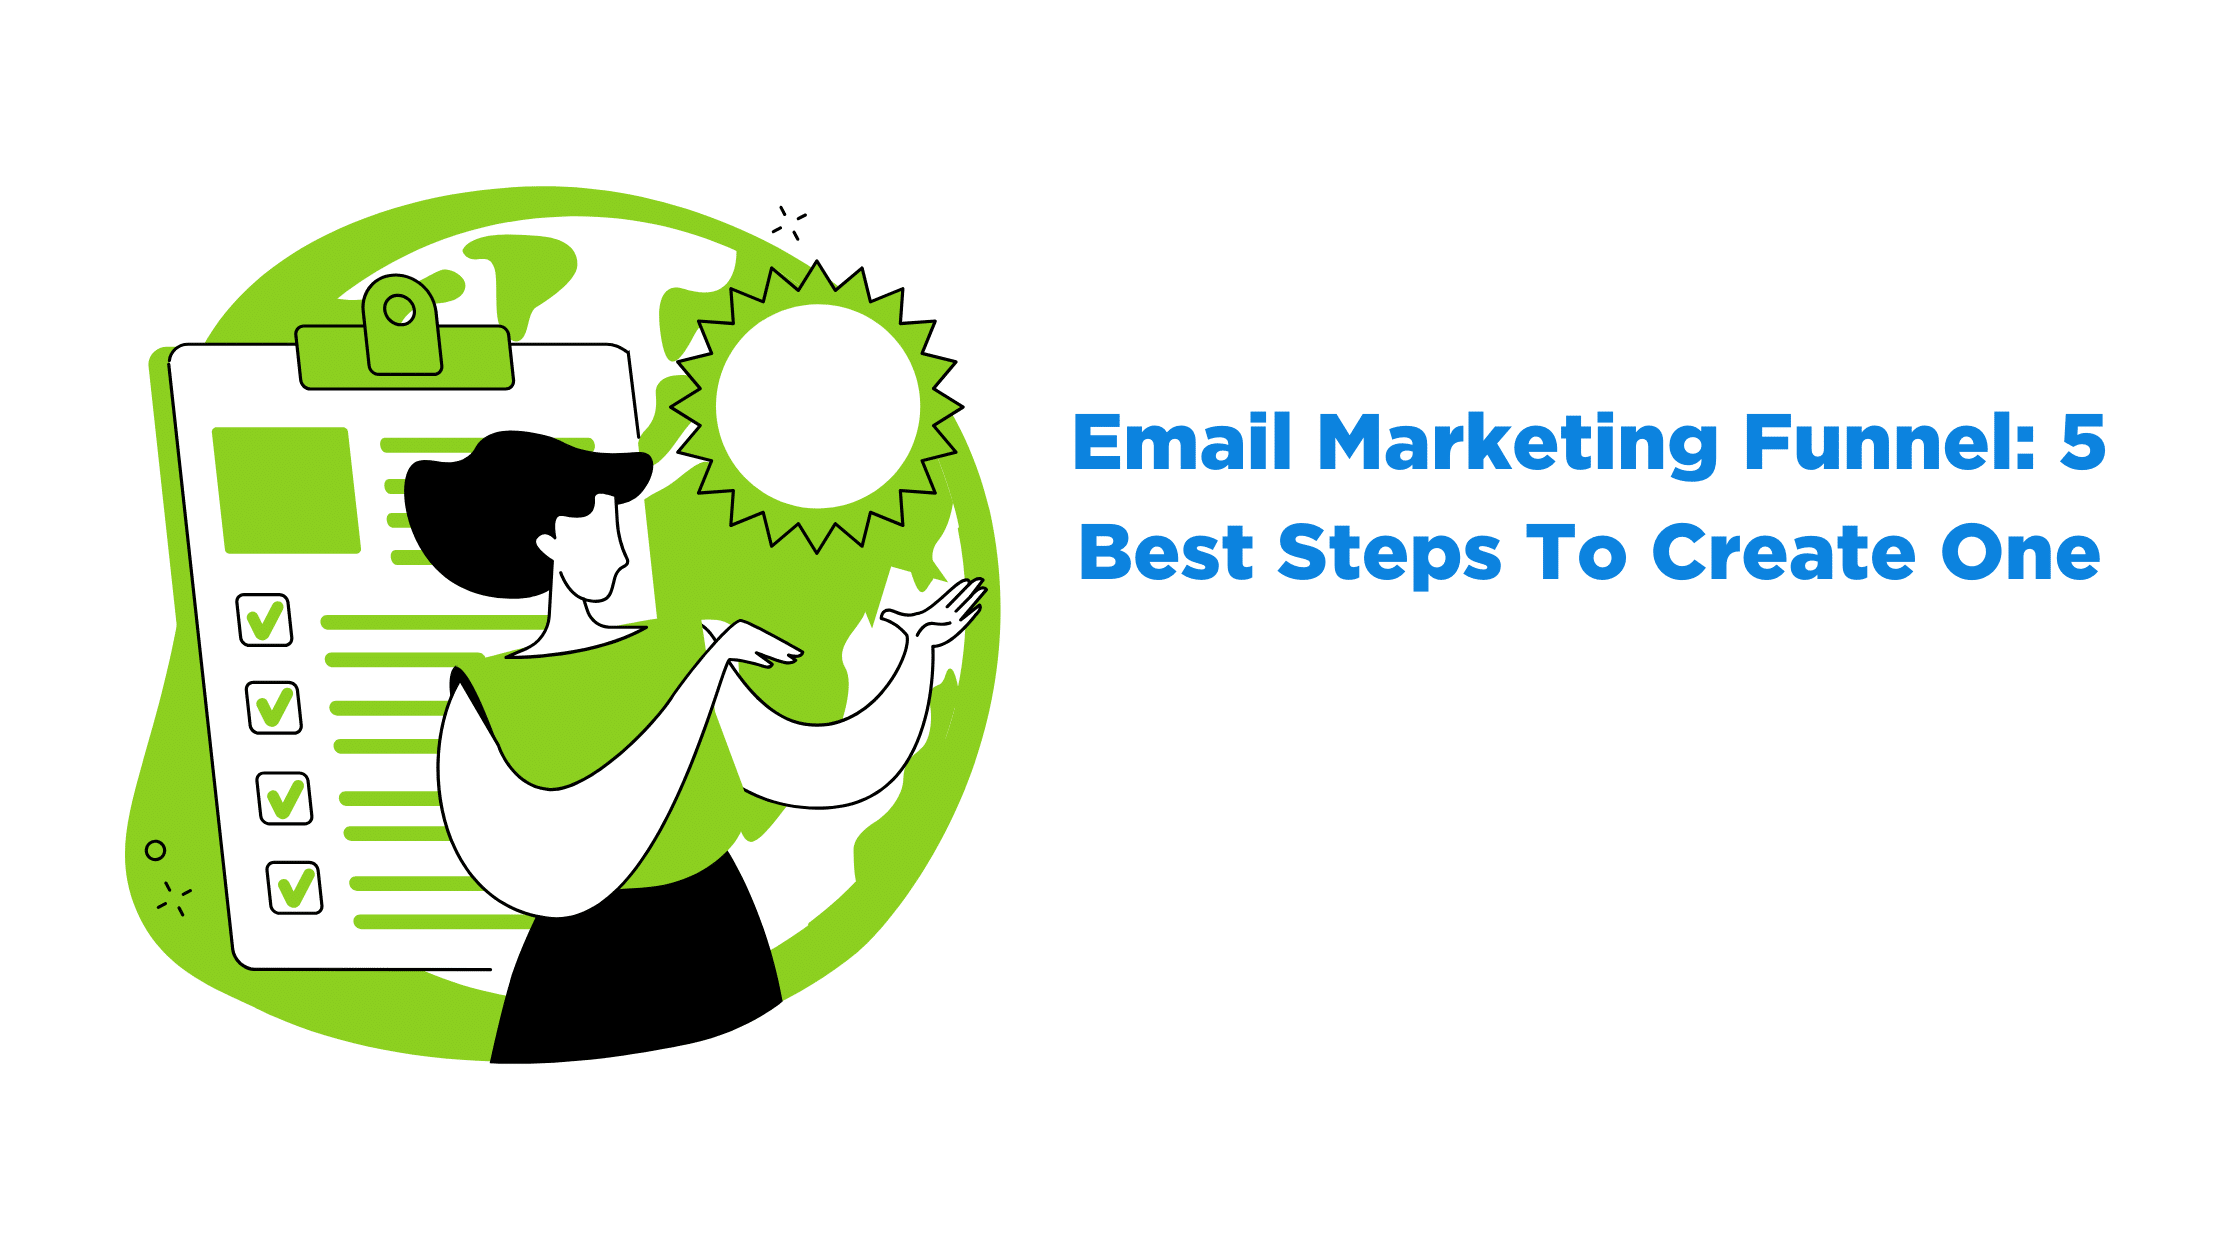 Email Marketing Funnel: 5 Best Steps To Create One